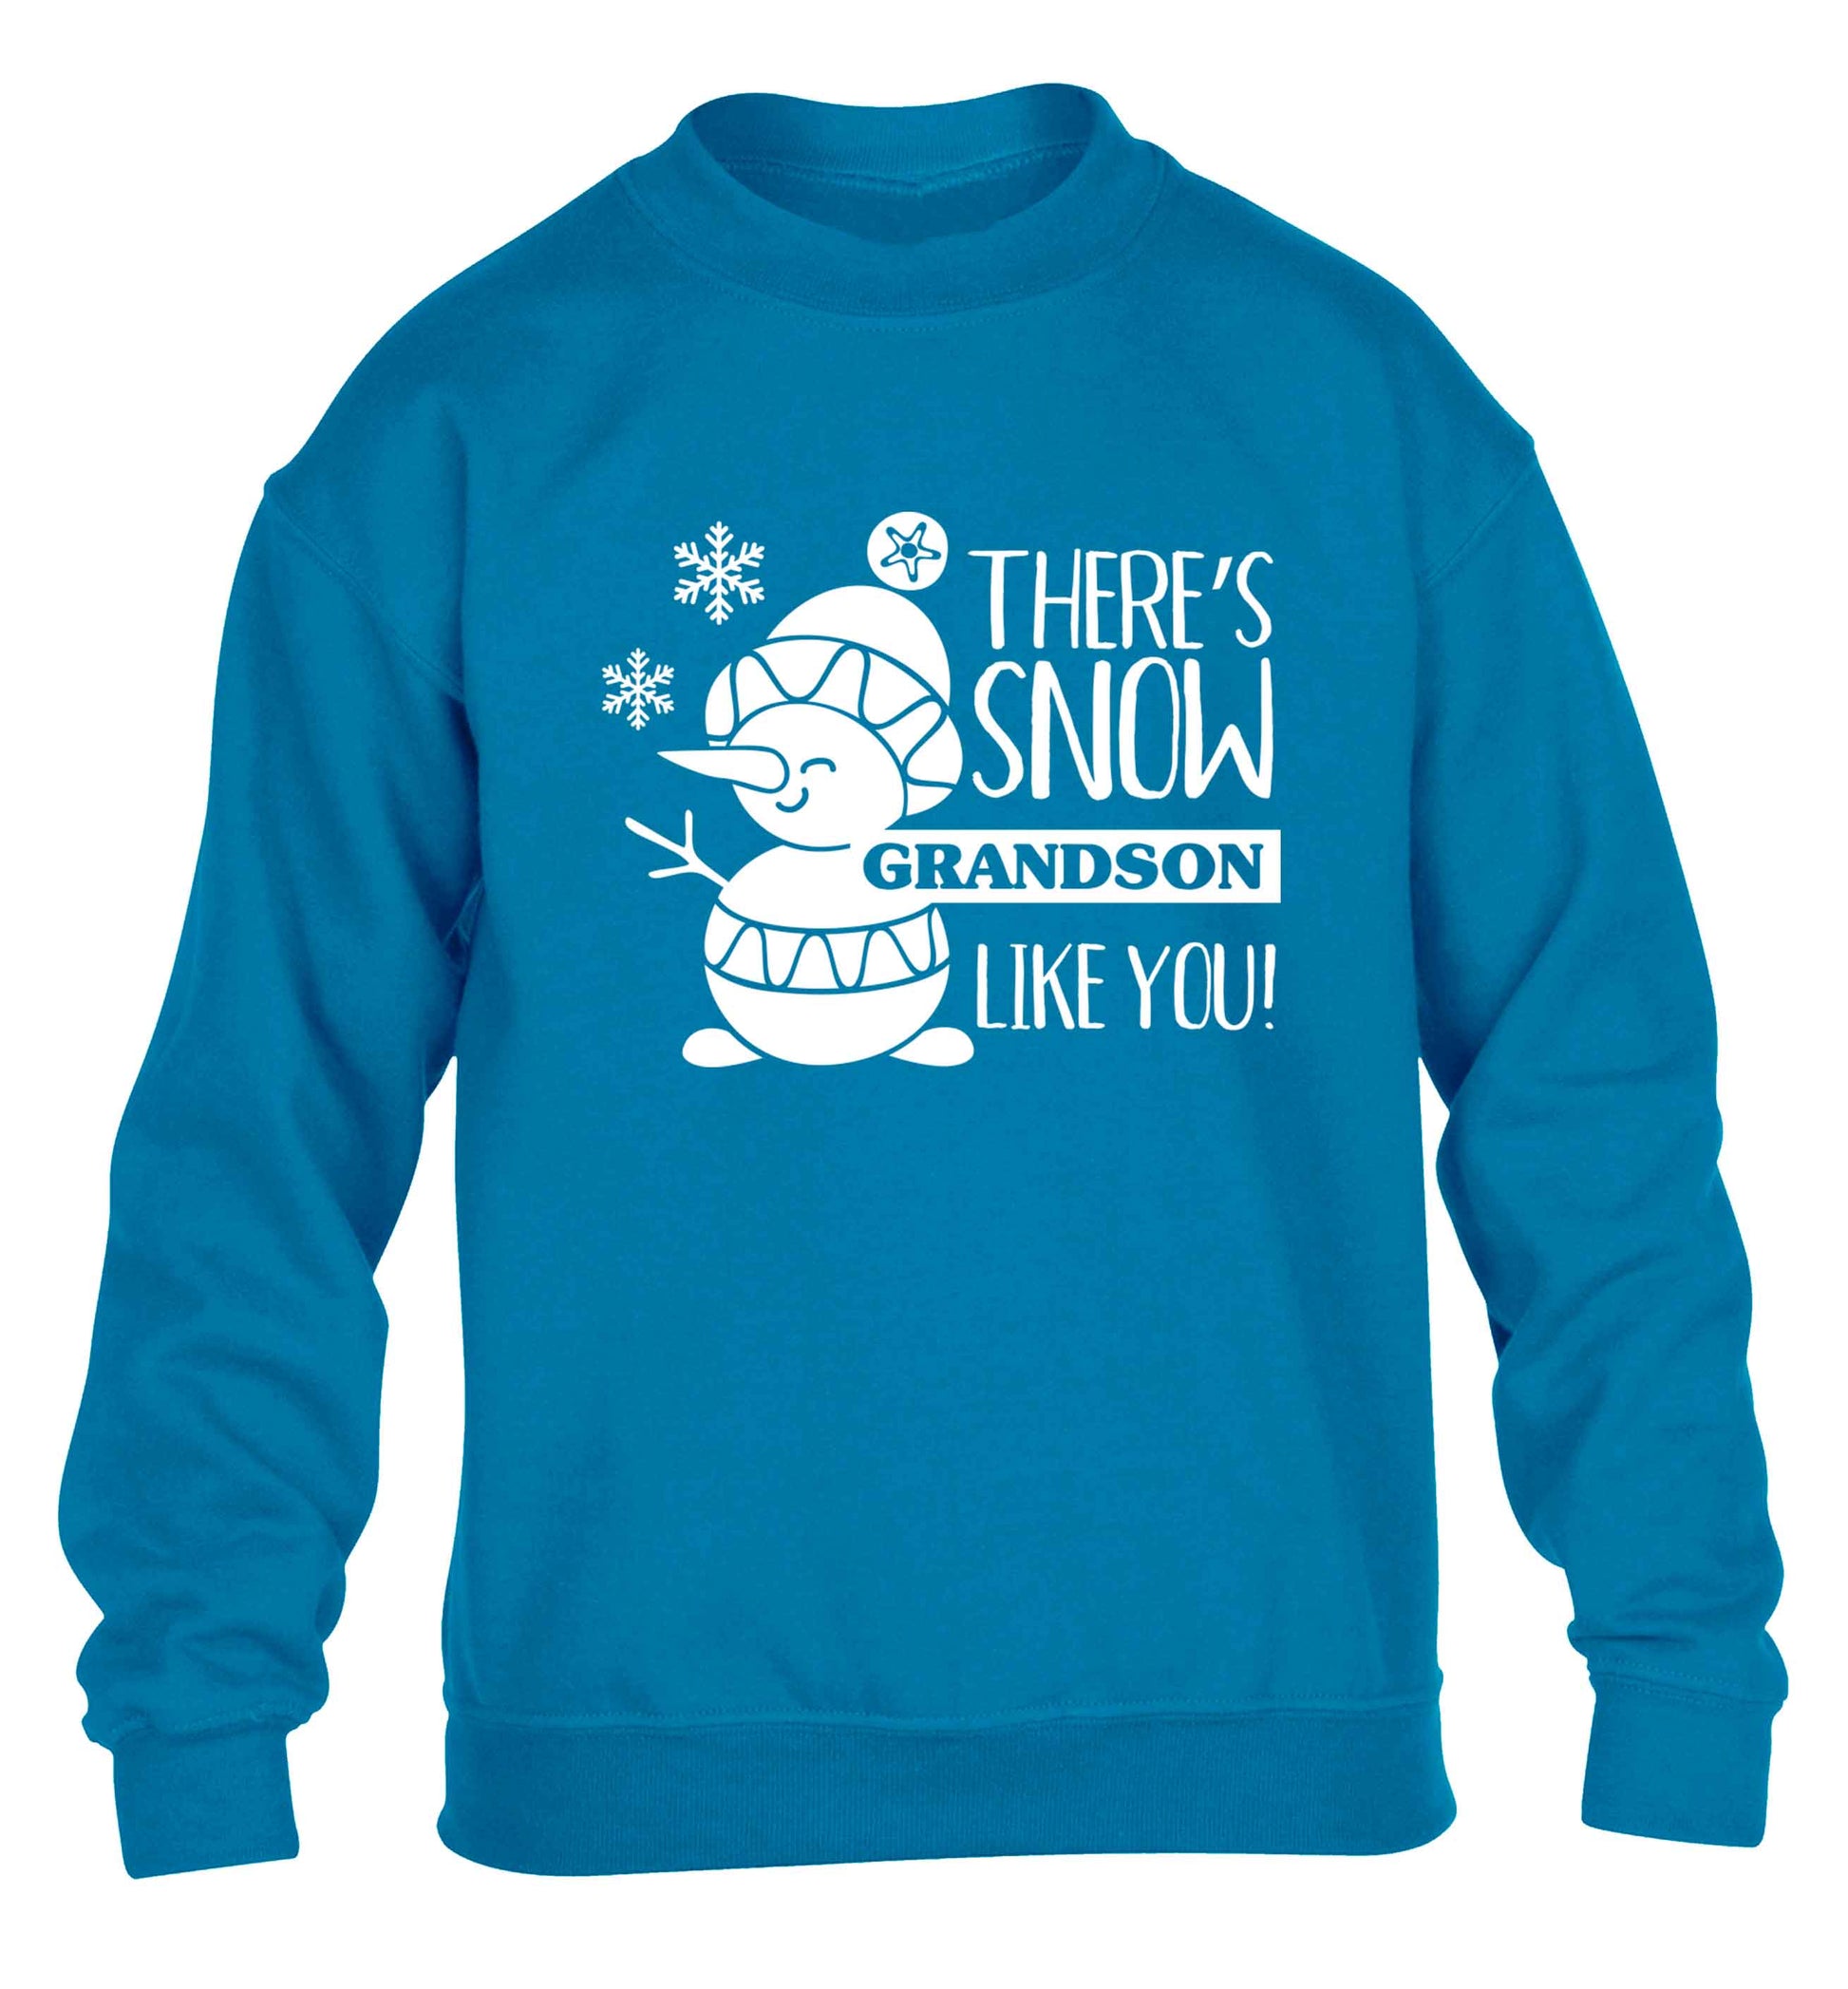 There's snow grandson like you children's blue sweater 12-13 Years